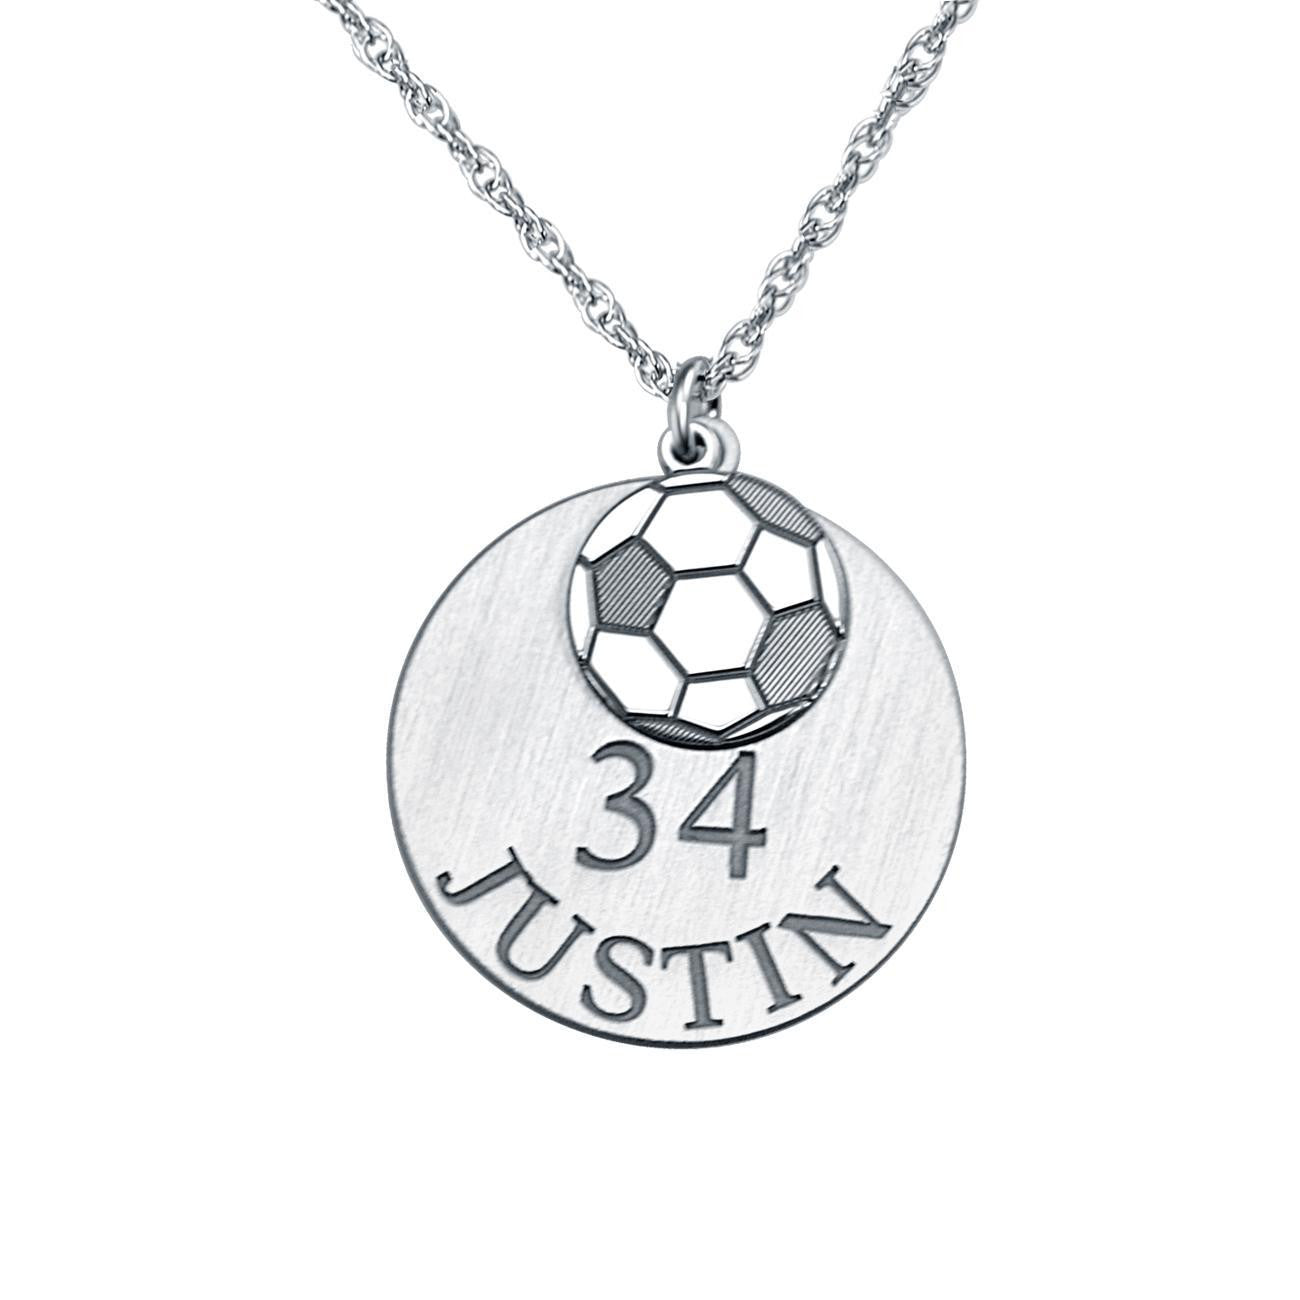 Soccer Ball Jewelry Gifts -Soccer Ball Pendant - Necklaces - Earrings –  House of Morgan Pewter